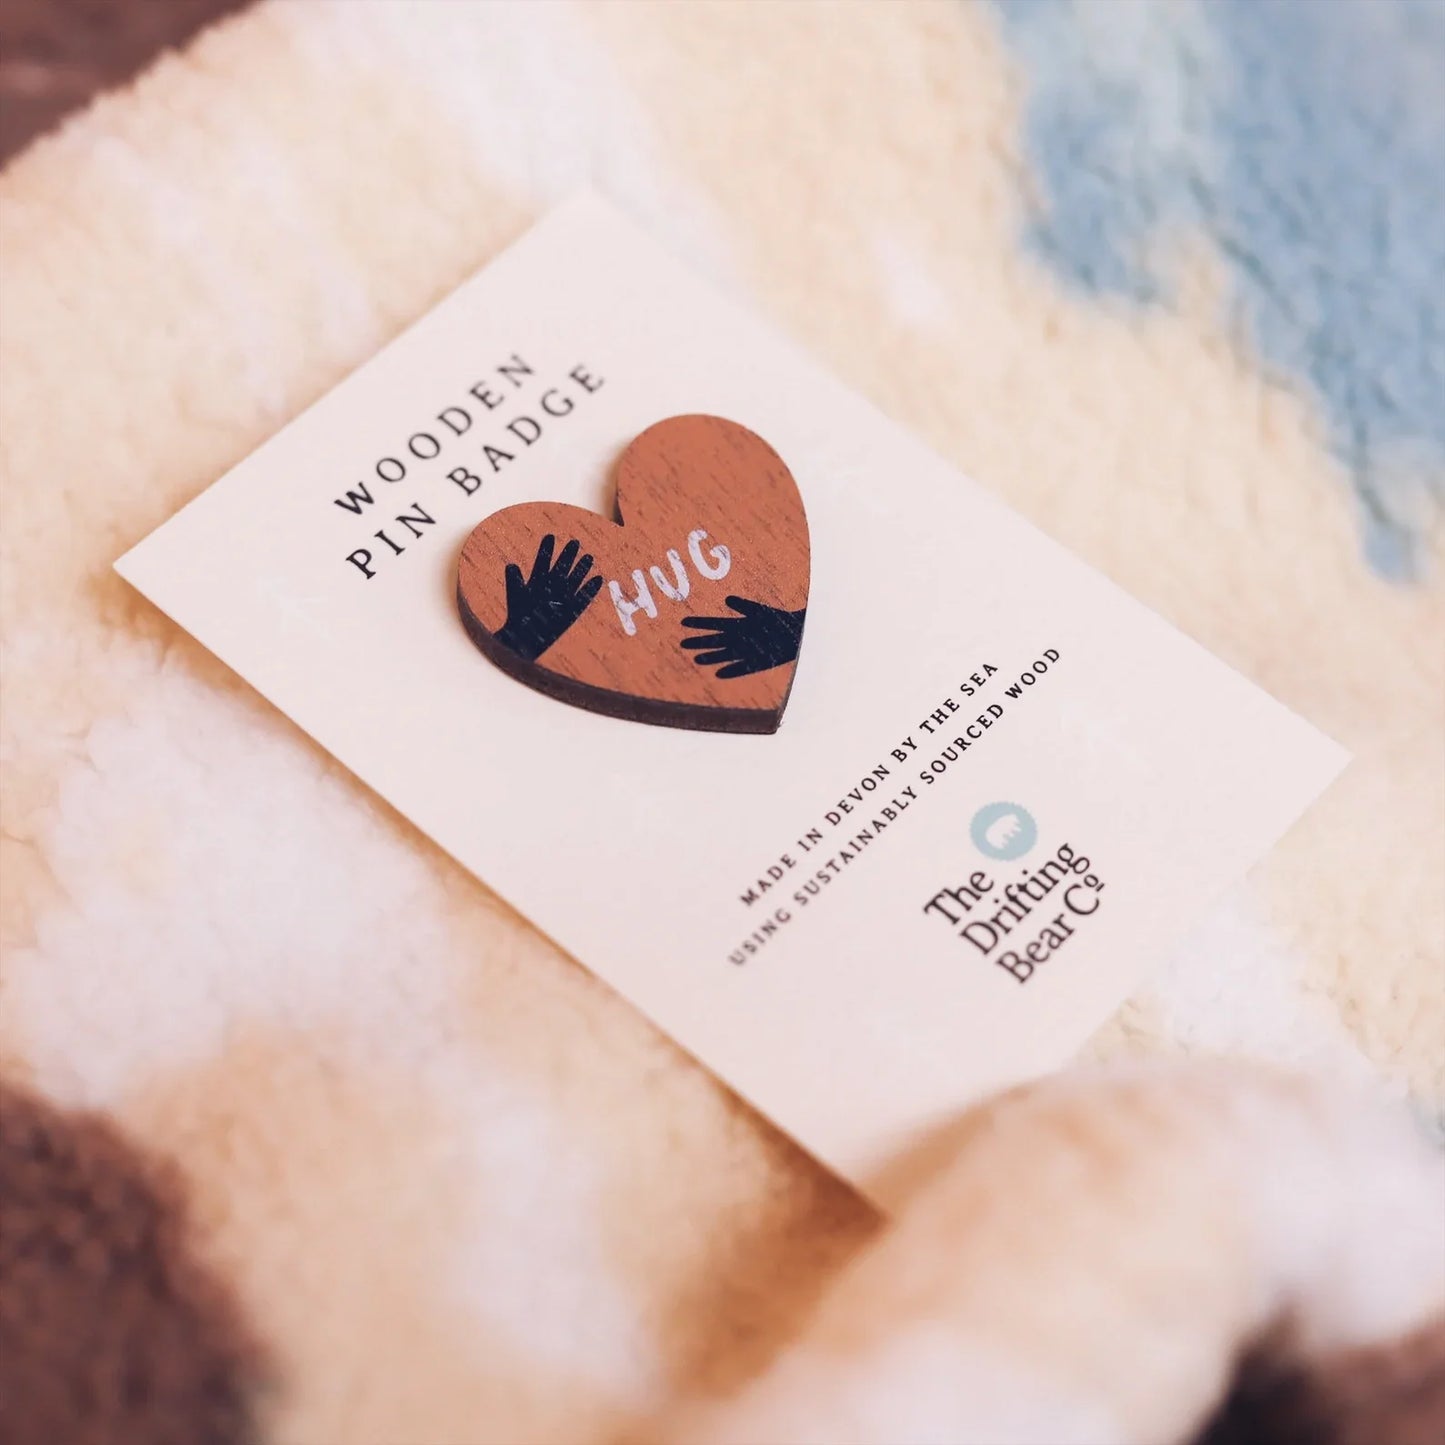 Wooden pin badge in the shape of a heart with hands wrapping round either side and the word hug in the centre. Printed on walnut veneer, pinned onto a recycled backing card which reads 'Wooden Pin Badge' in large text and 'Made in Devon by the sea using sustainably sourced wood' in smaller text below. Placed on a fleece jacket. 